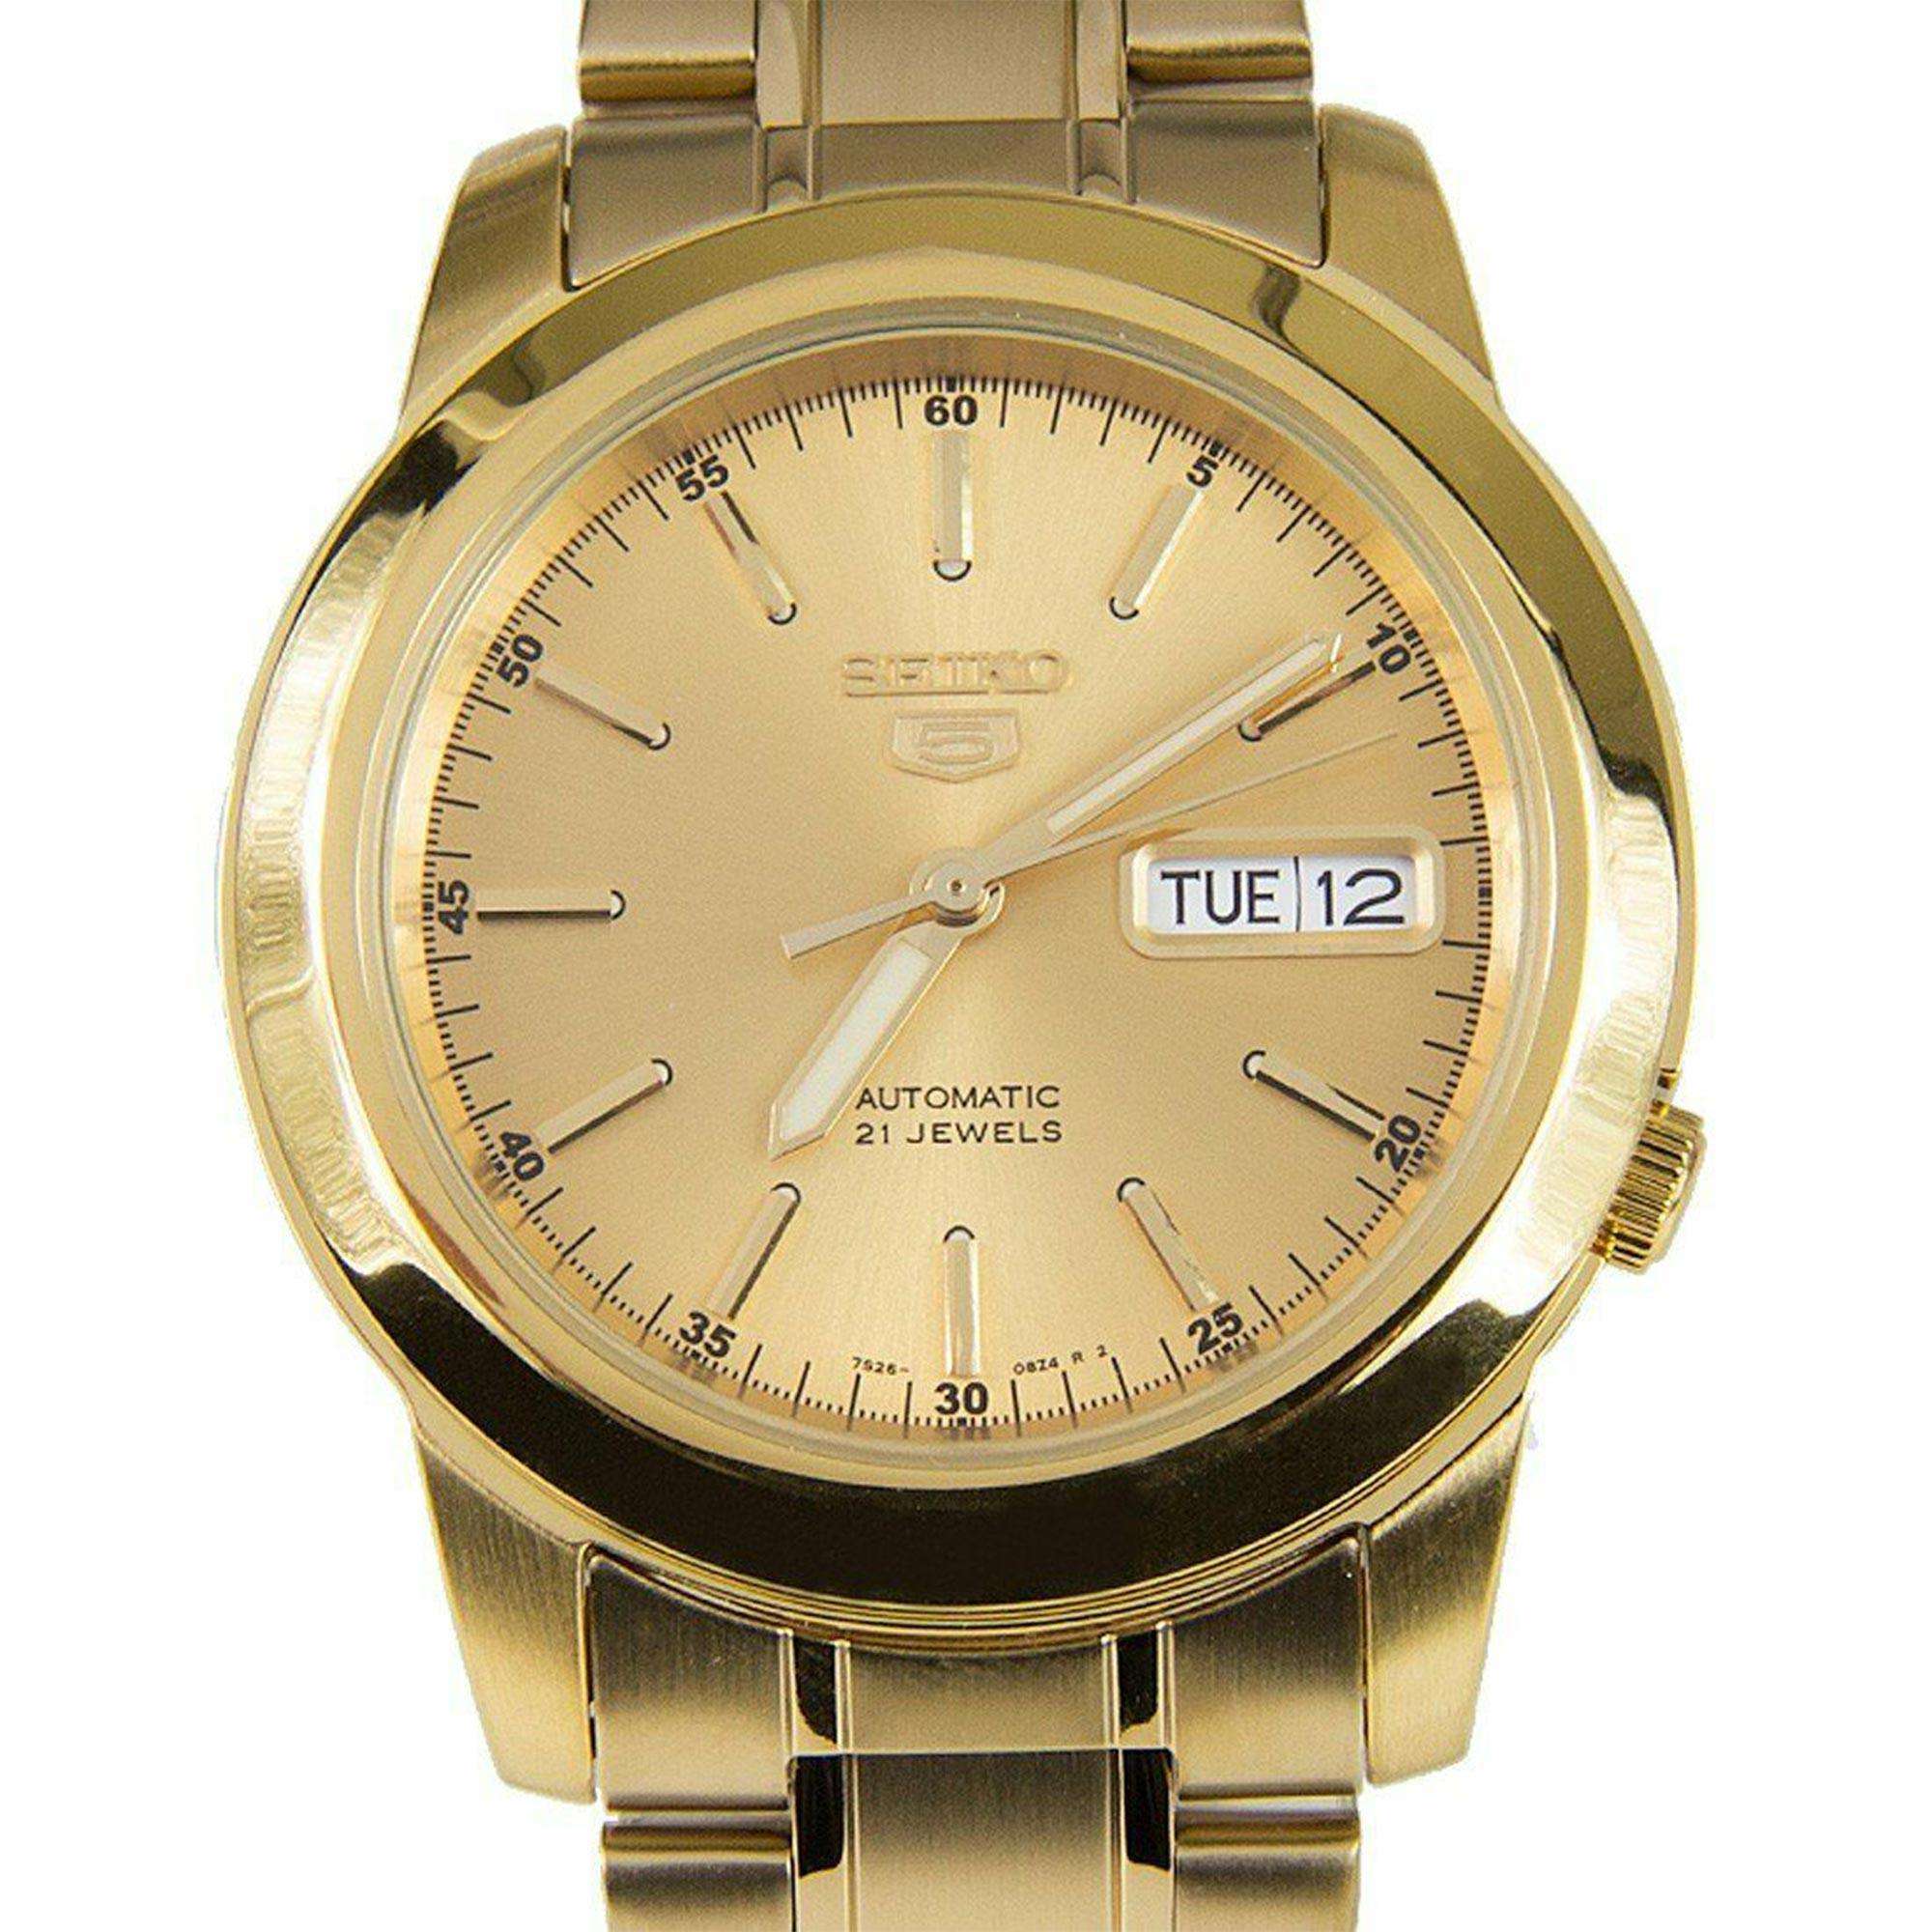 Seiko 5 Automatic Full Gold PVD Stainless Steel Men's Watch SNKE56K1